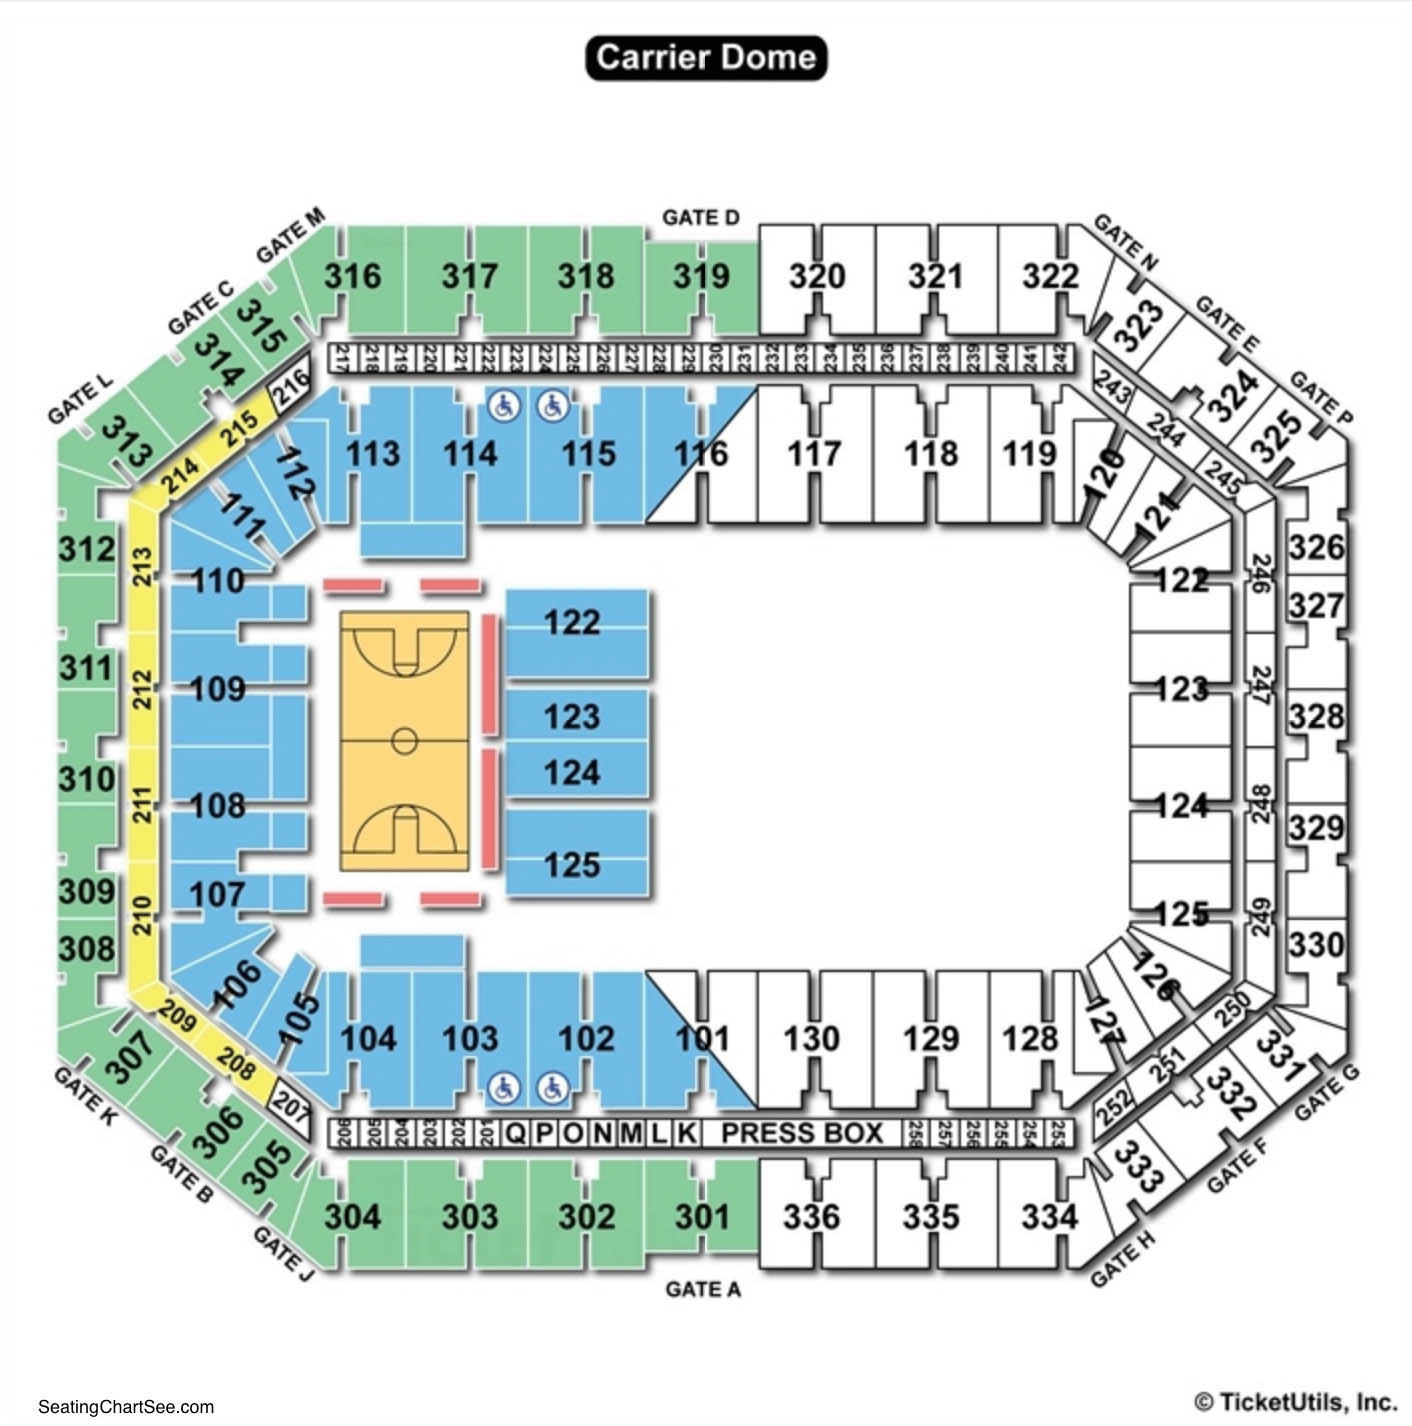 Carrier Dome Seating Charts Views